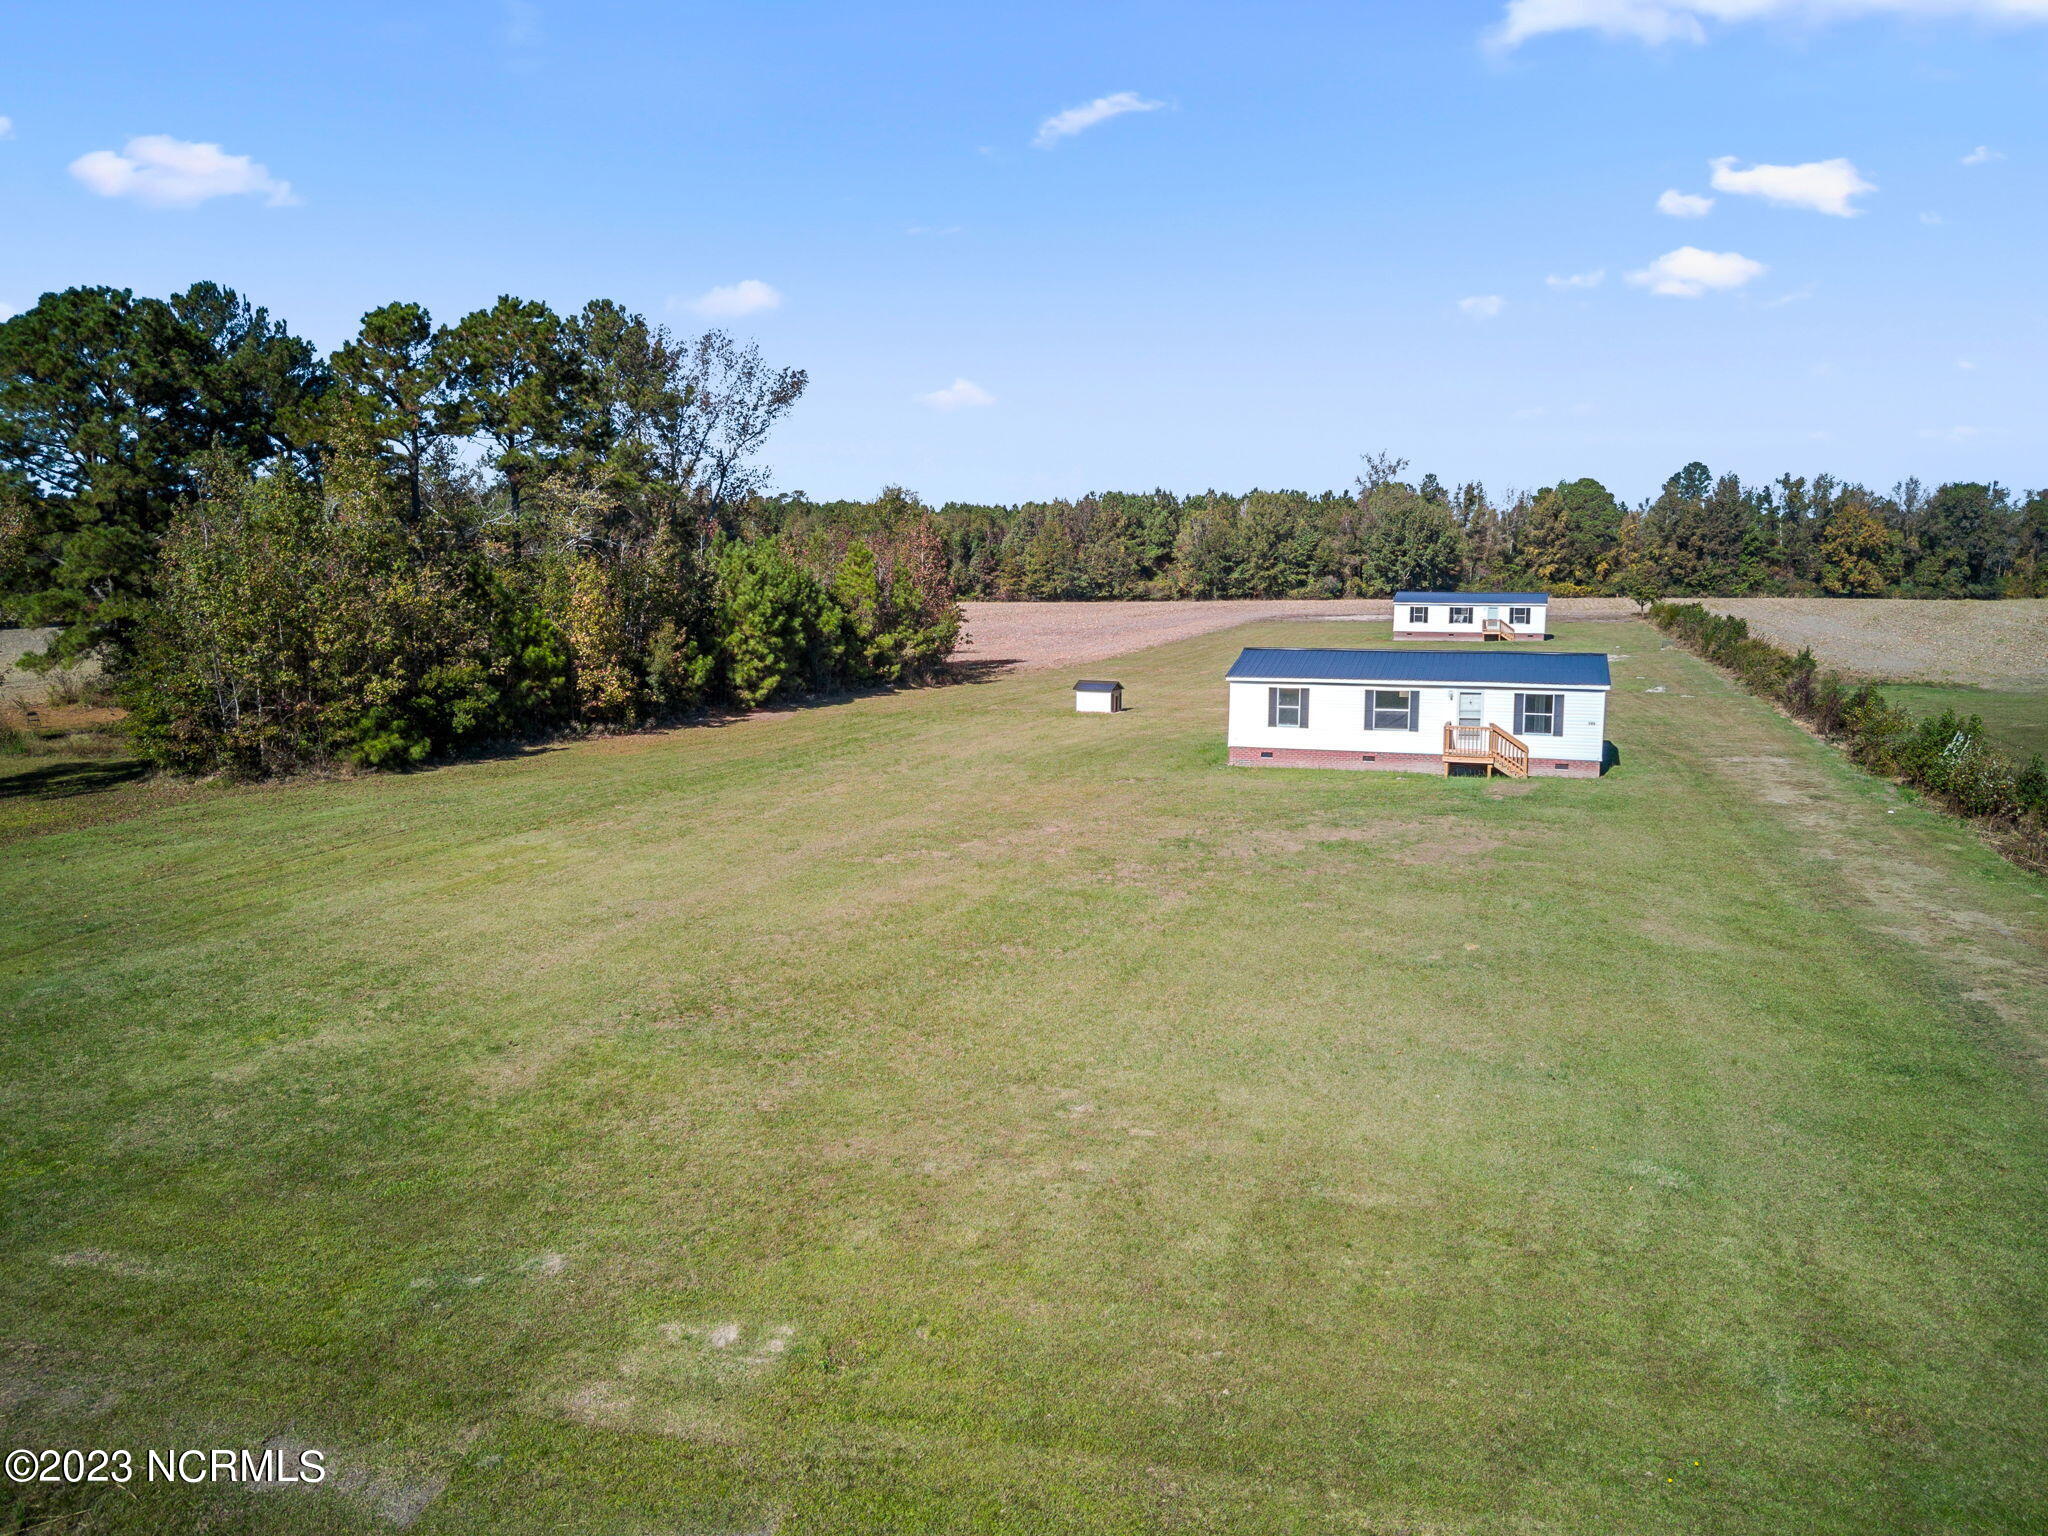 36-web-or-mls-791 Mille Christine Rd - 3